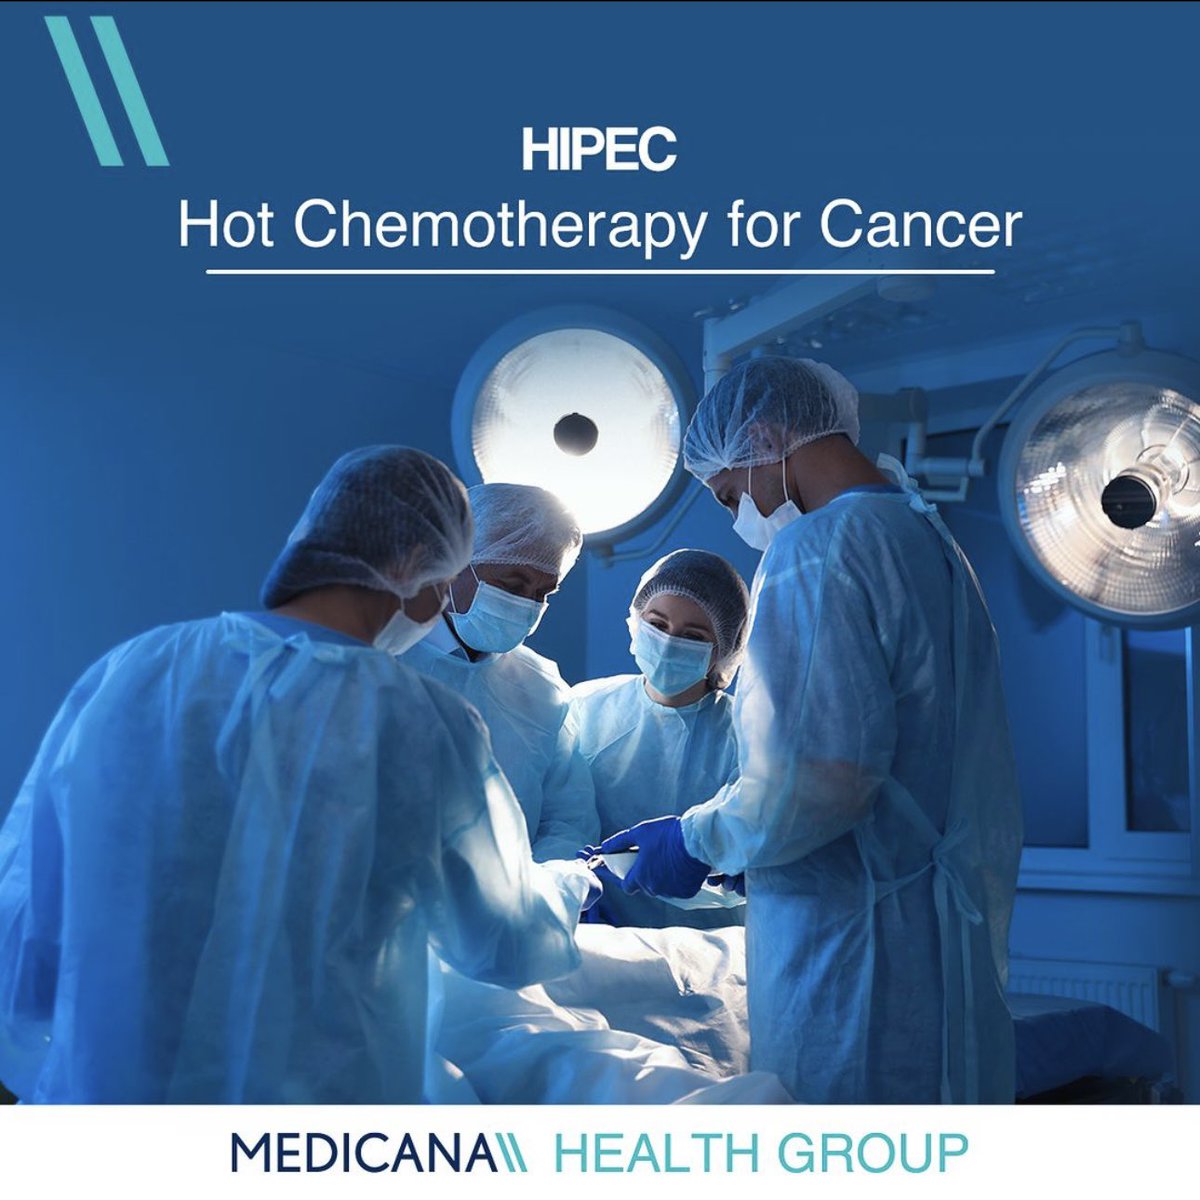 Hyperthermic Intraperitoneal  Chemotherapy, HIPEC is an intraoperative cancer treatment method that involves filling the abdominal cavity with heated chemotherapy drugs. 

HIPEC is performed after large amounts of tumors or lesions are removed from the abdominal region. 

This…